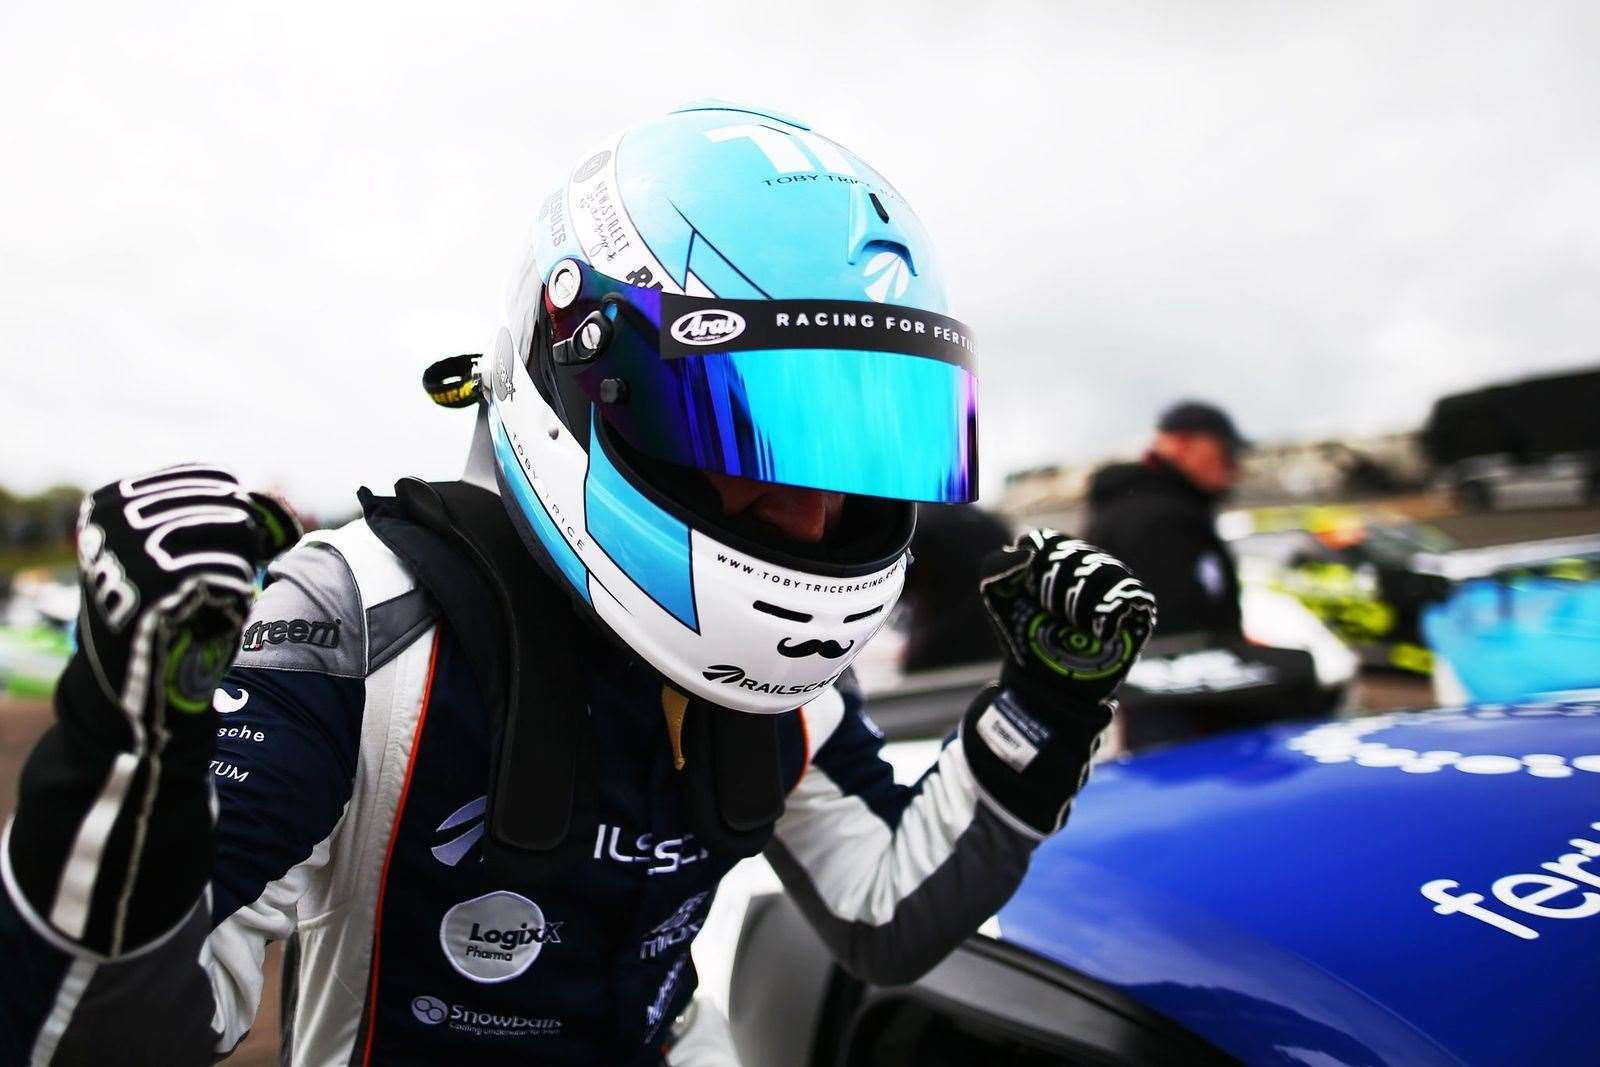 Toby Trice claims hat-trick of wins at Brands Hatch in Ginetta GT Academy debut Picture: Jakob Ebrey